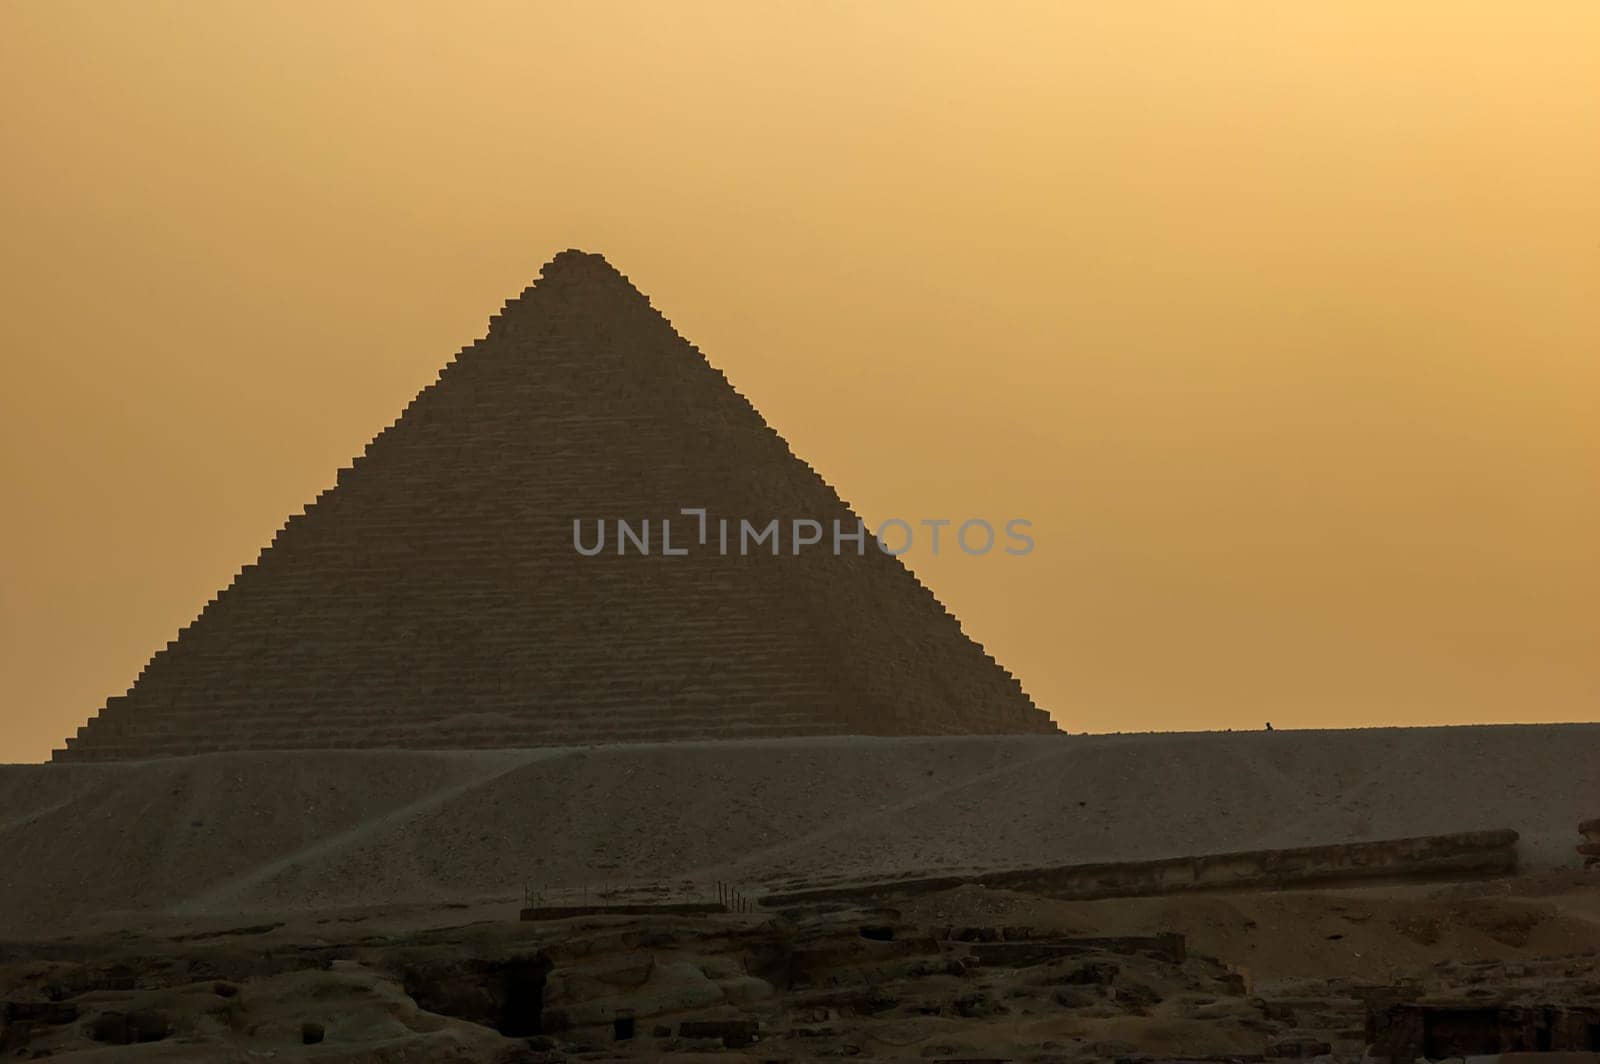 The Pyramid of Khafre at the sunset by Giamplume